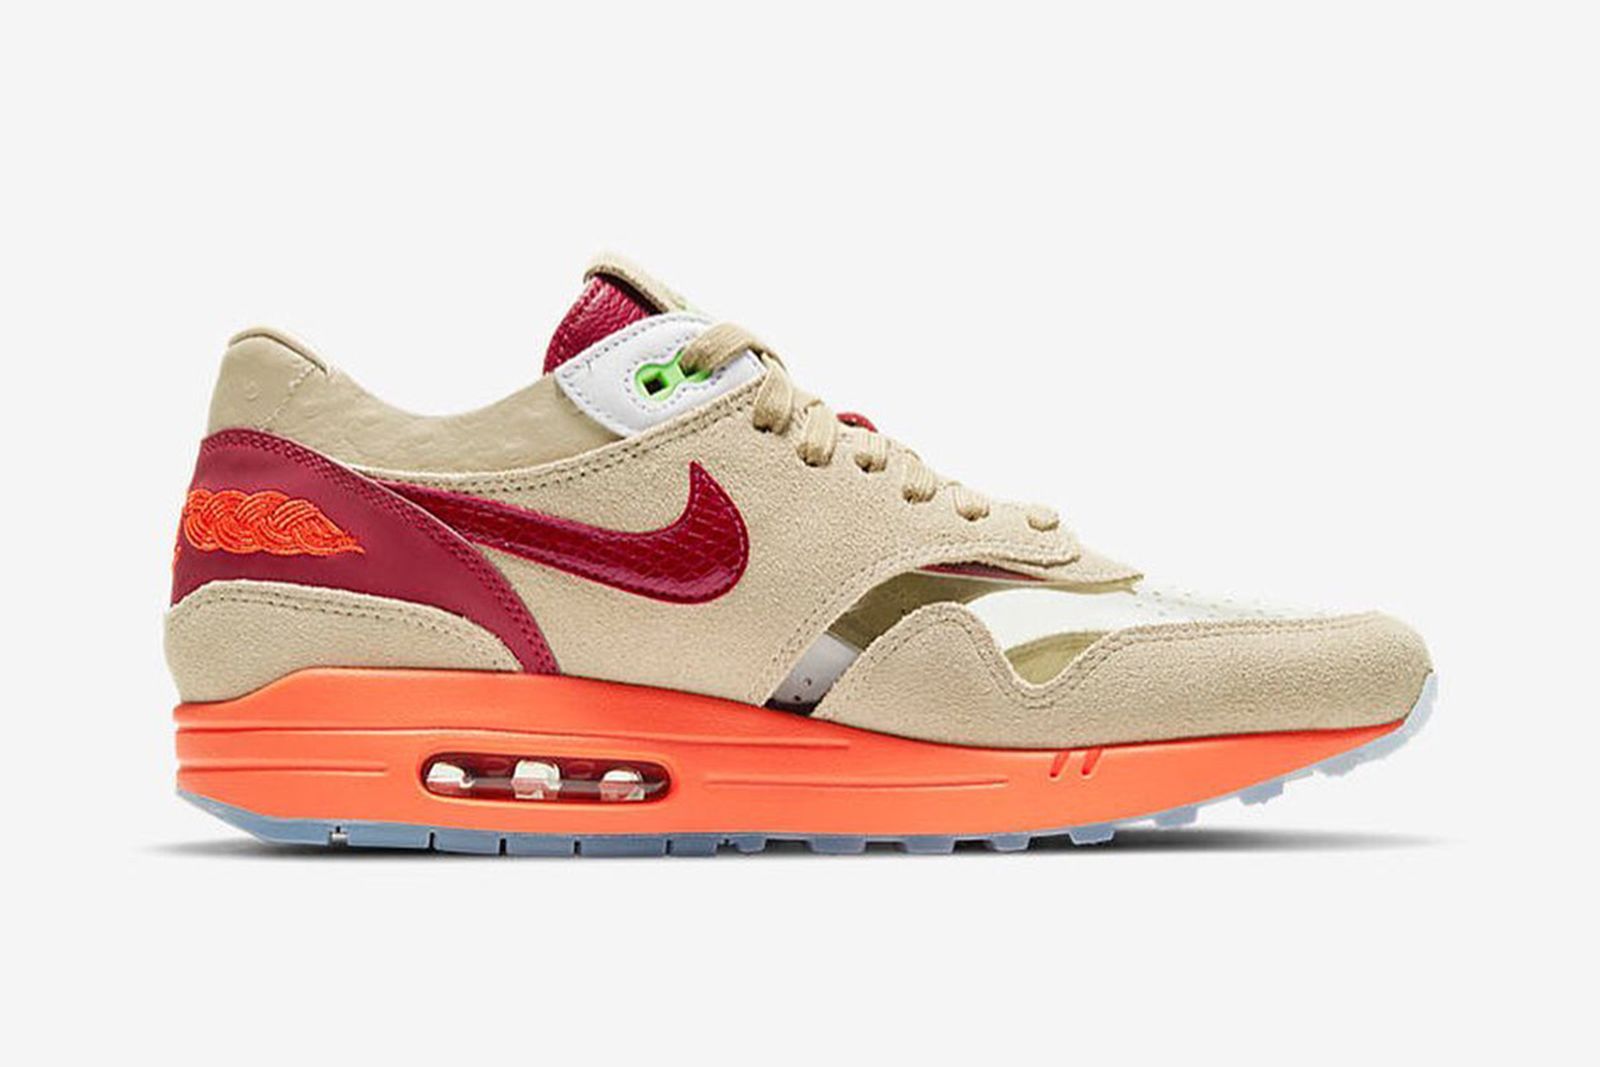 clot-nike-air-max-1-kiss-of-death-2021-release-date-price-04